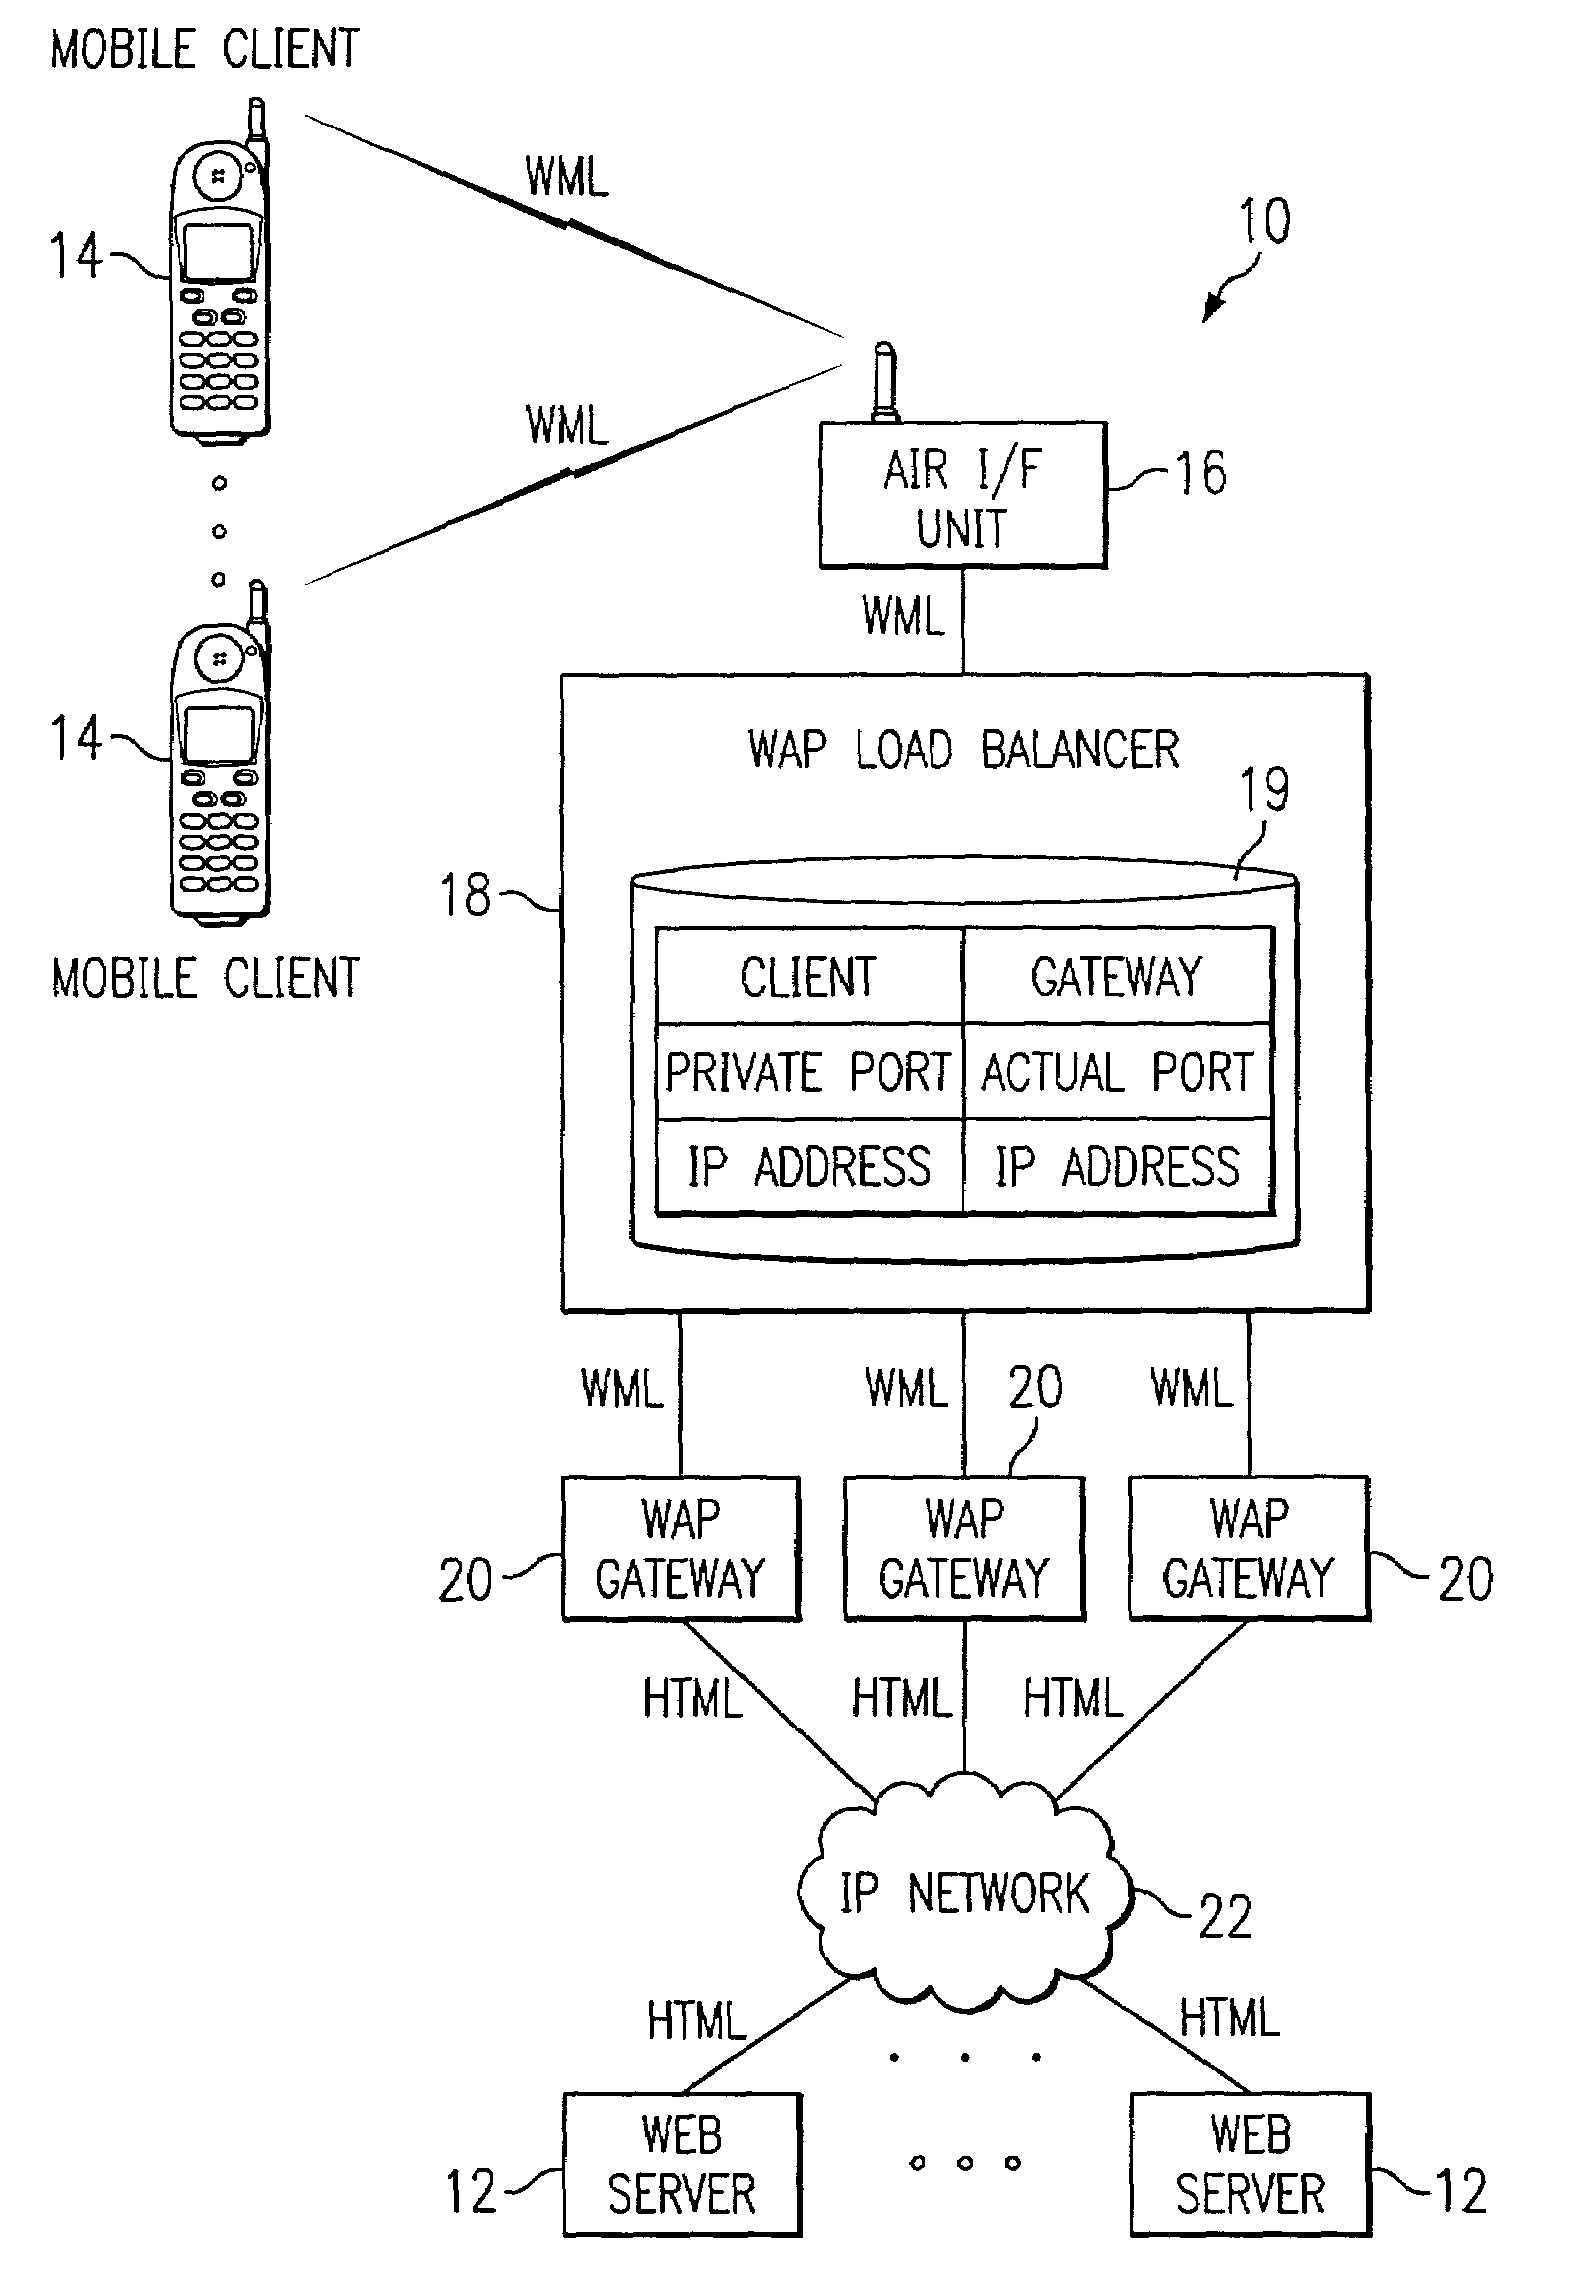 Apparatus and method for re-directing a client session